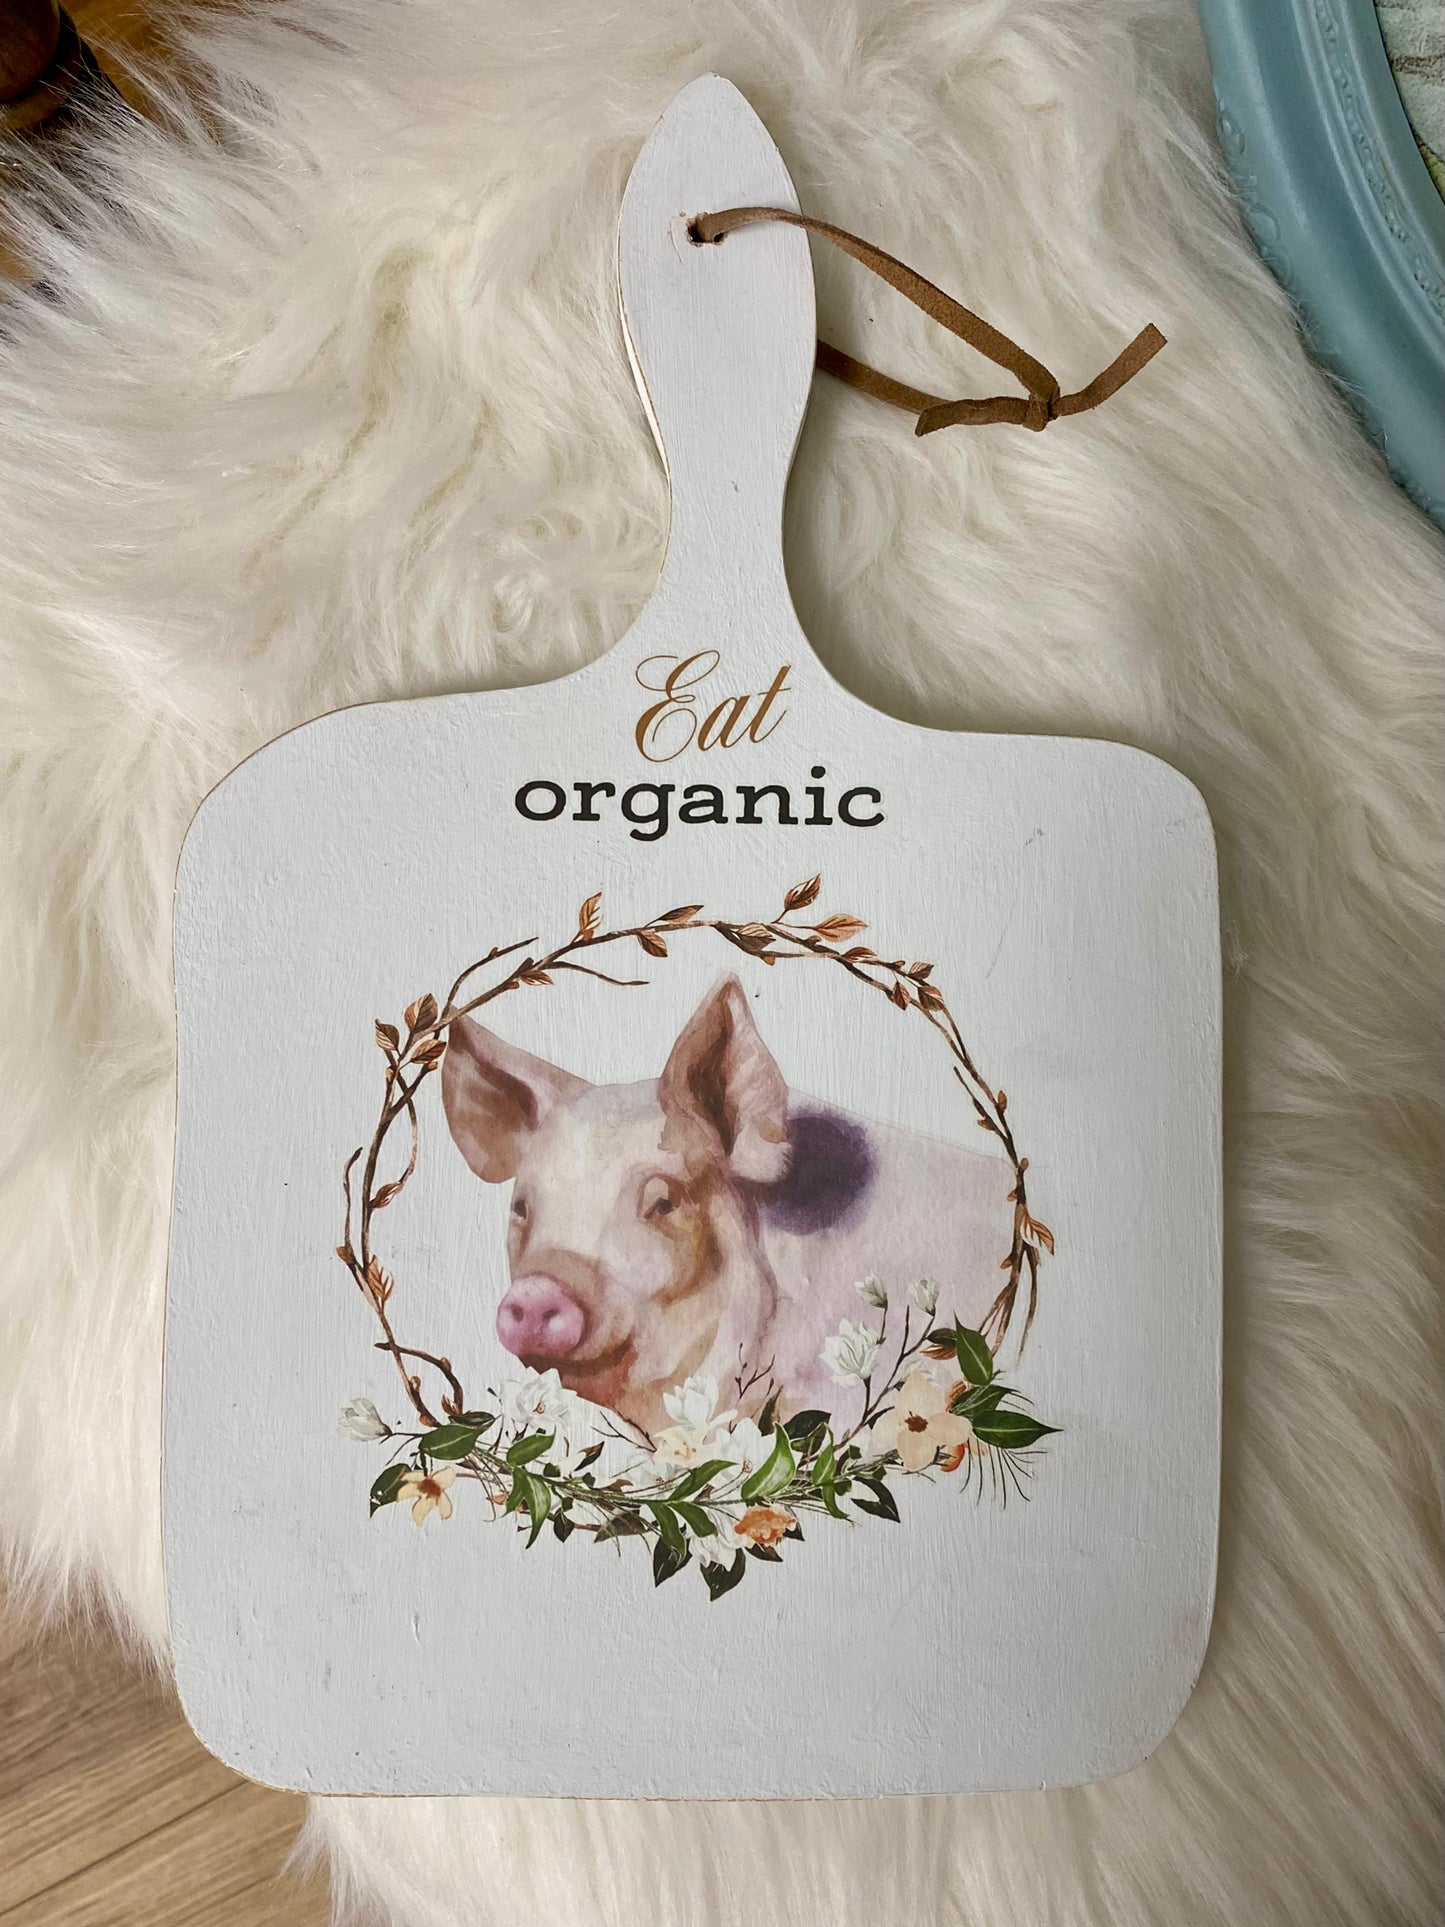 Eat Organic Pig Wooden Cutting Board Sign